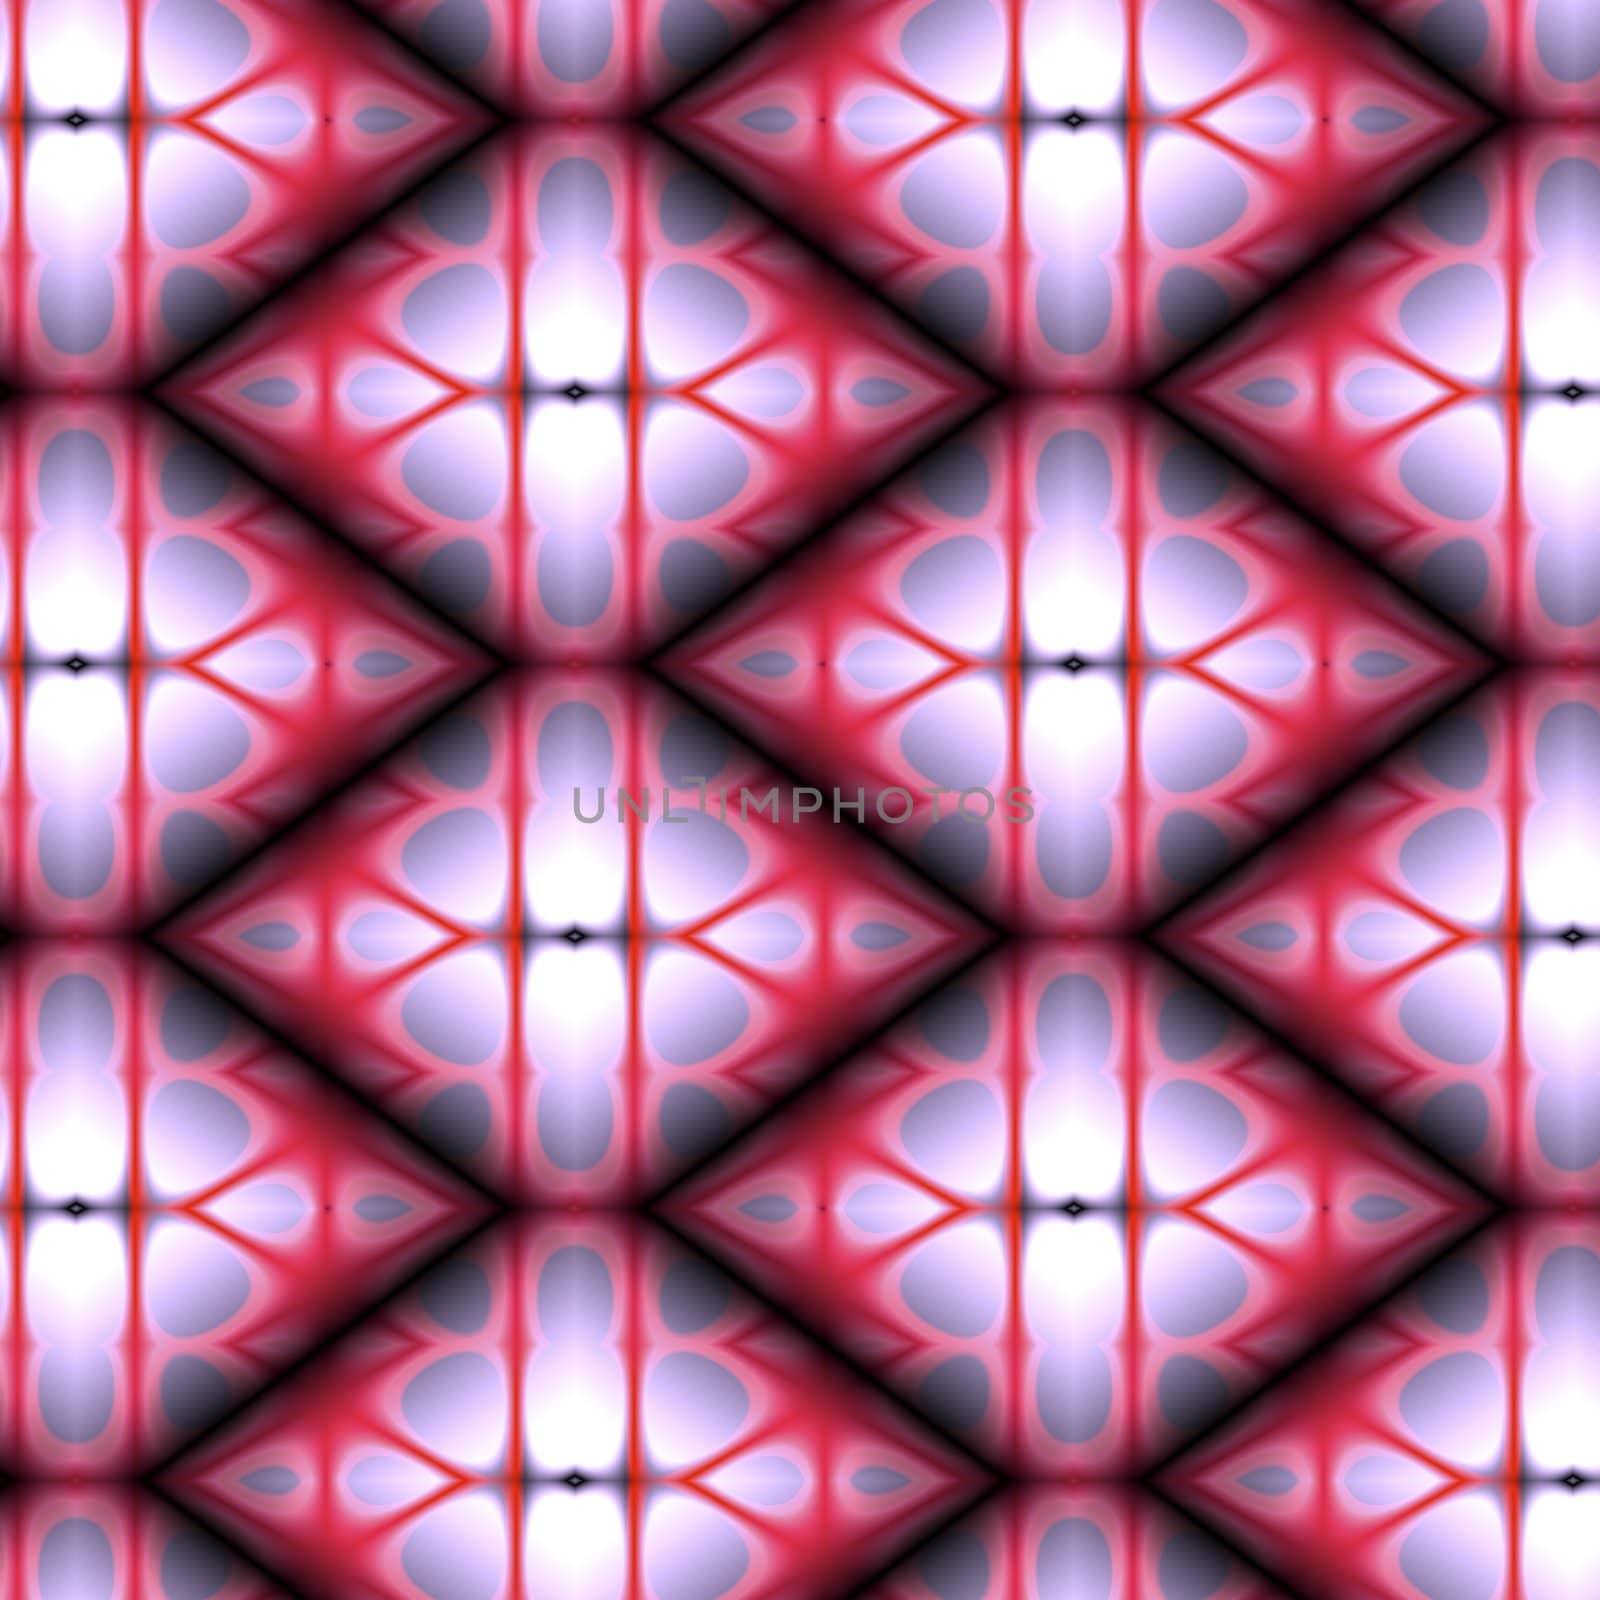 An abstract patterned interlocking diamond shaped tile background done in red and purple.